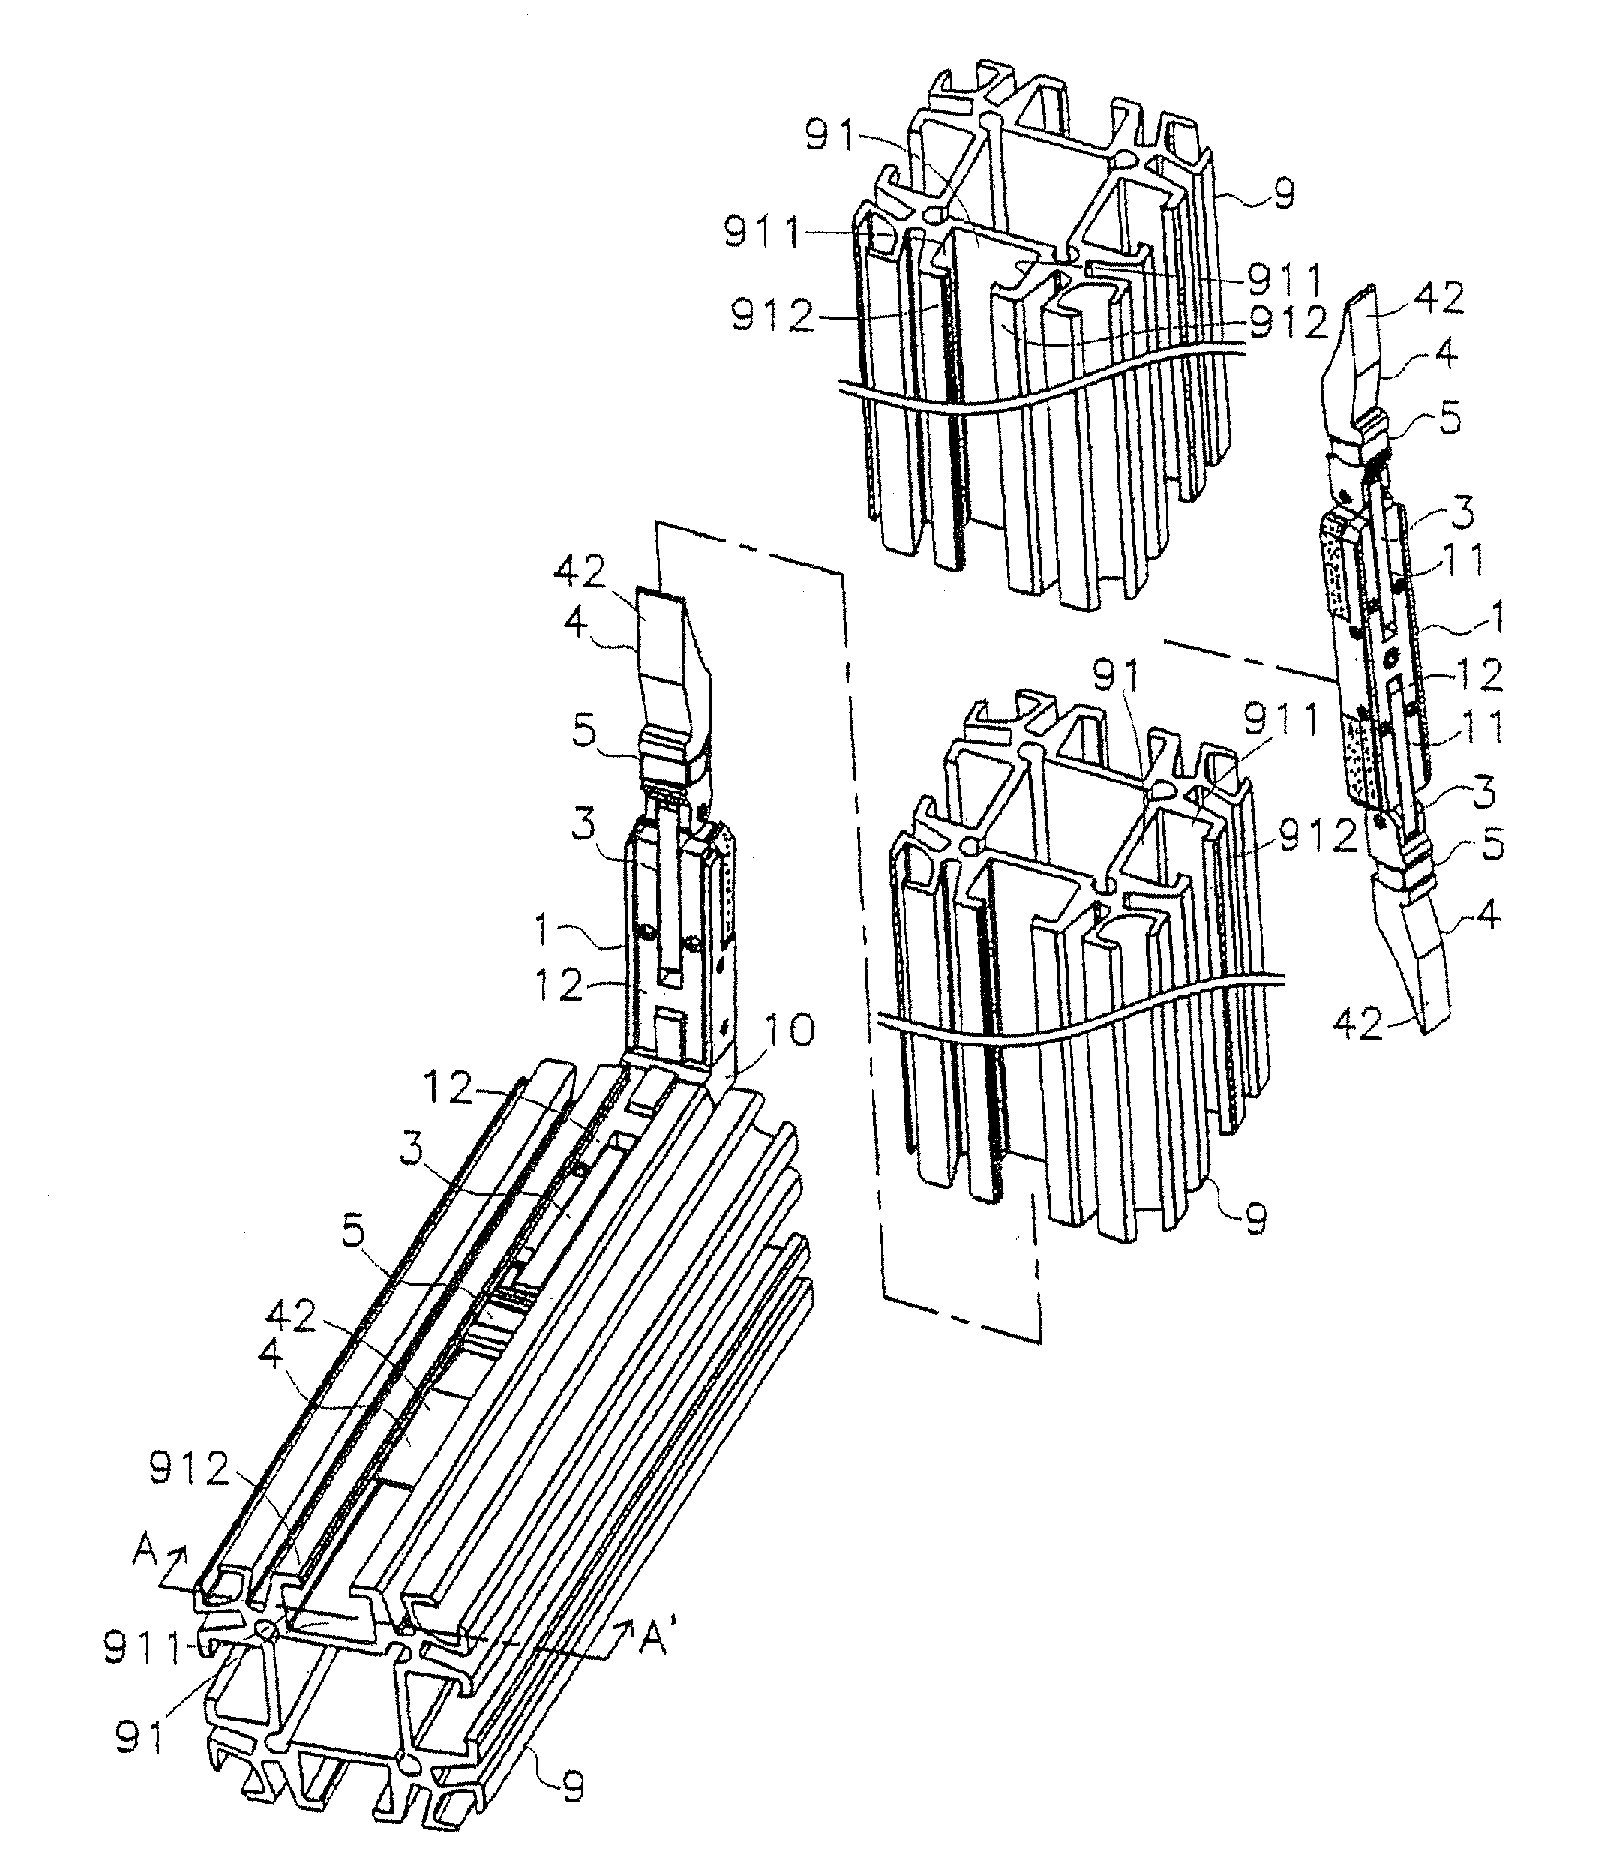 Structure of connector for aluminum extrusion frame